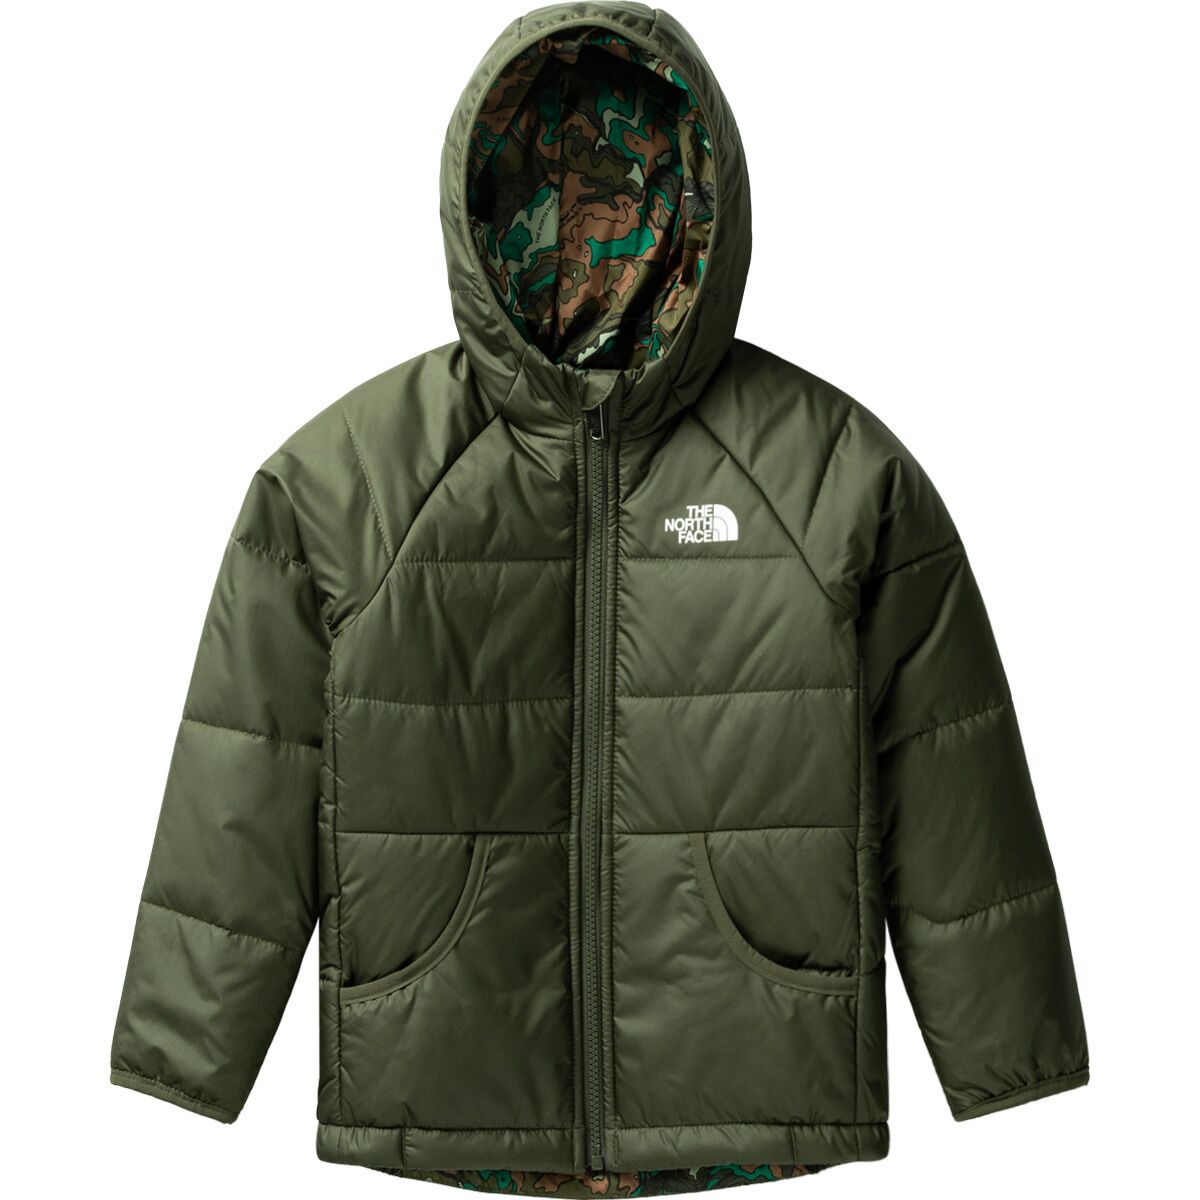 The North Face Perrito Reversible Hooded Jacket - Toddler Boys'